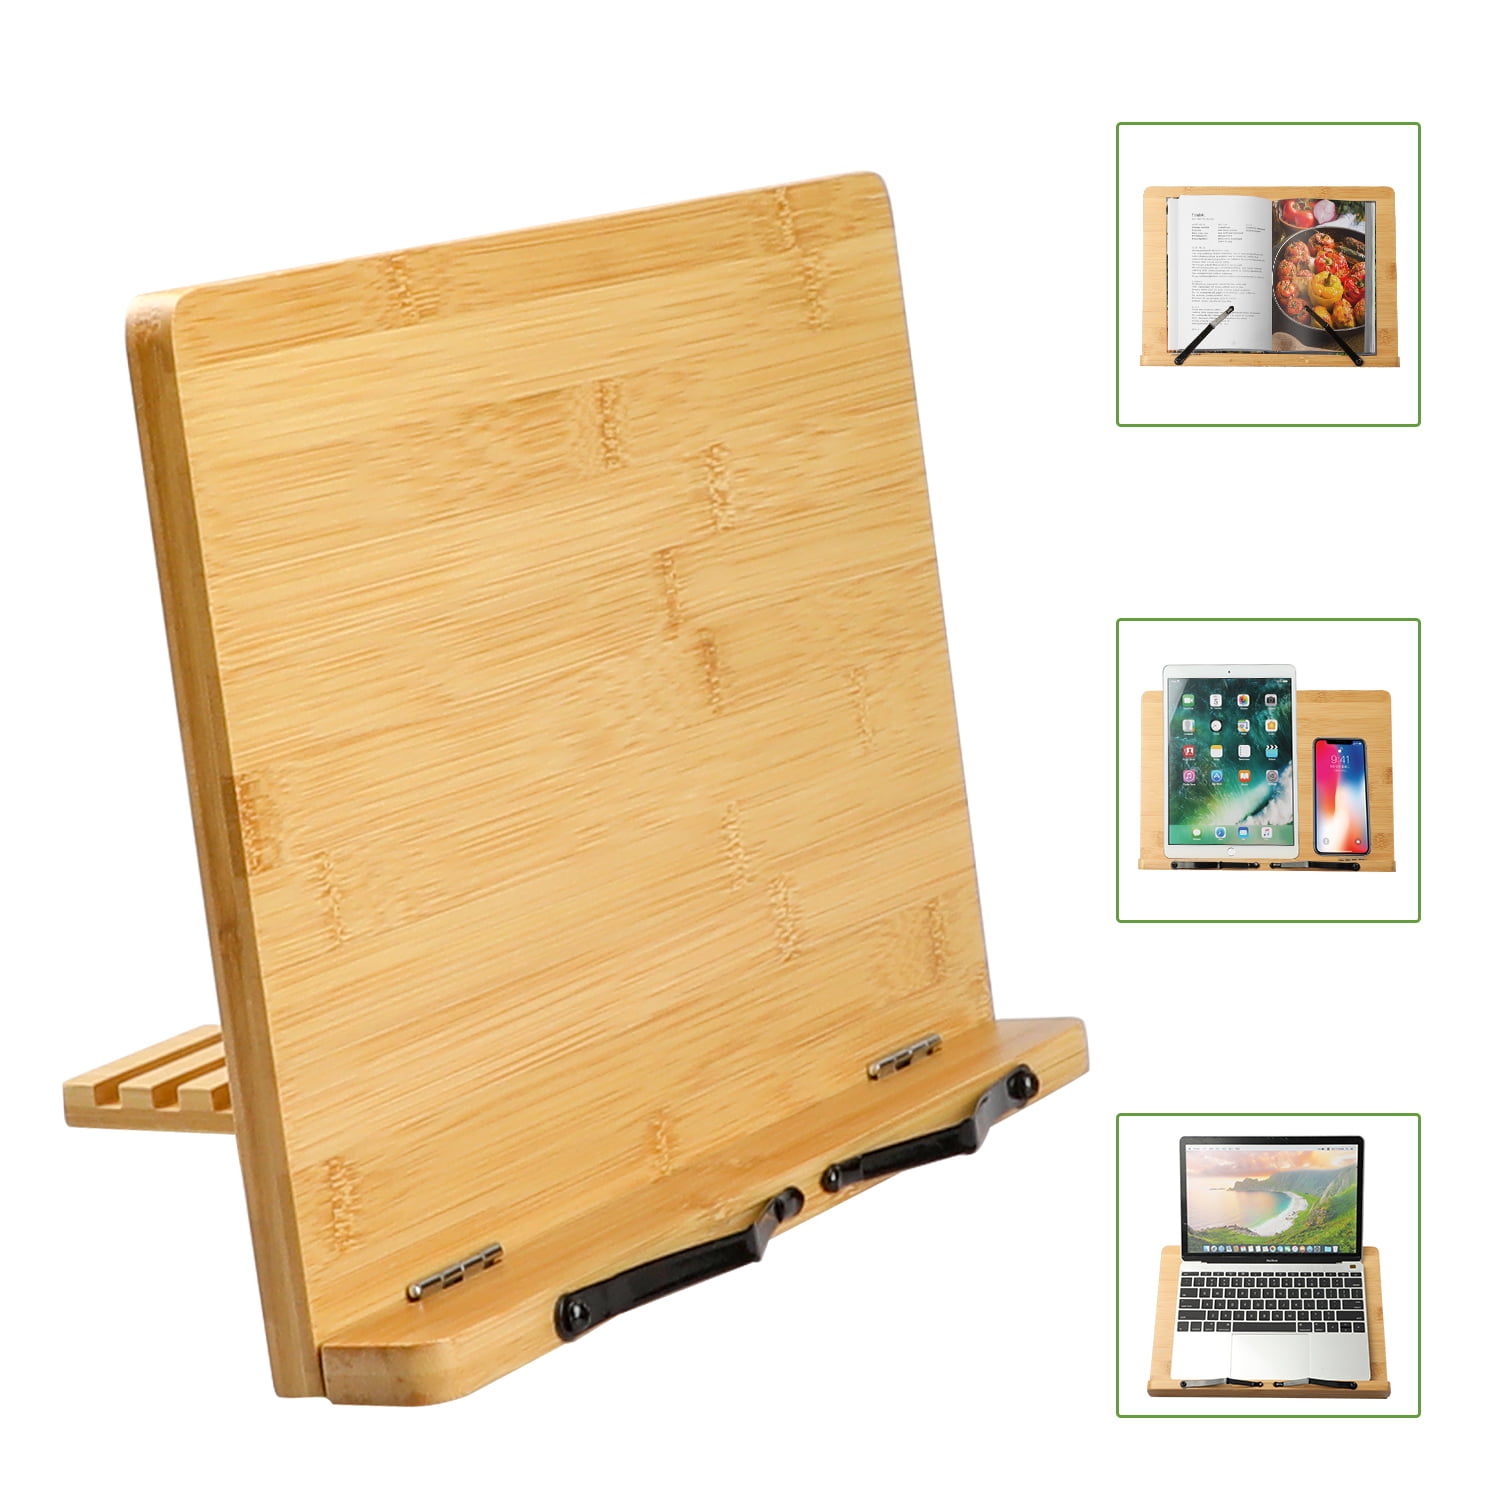 Organic Bamboo Book Stand, Wooden Cookbook Stand, Recipe Stand, Christmas  Gift, Housewarming Gift, Zero Waste Gift - On Sale - Bed Bath & Beyond -  33137276